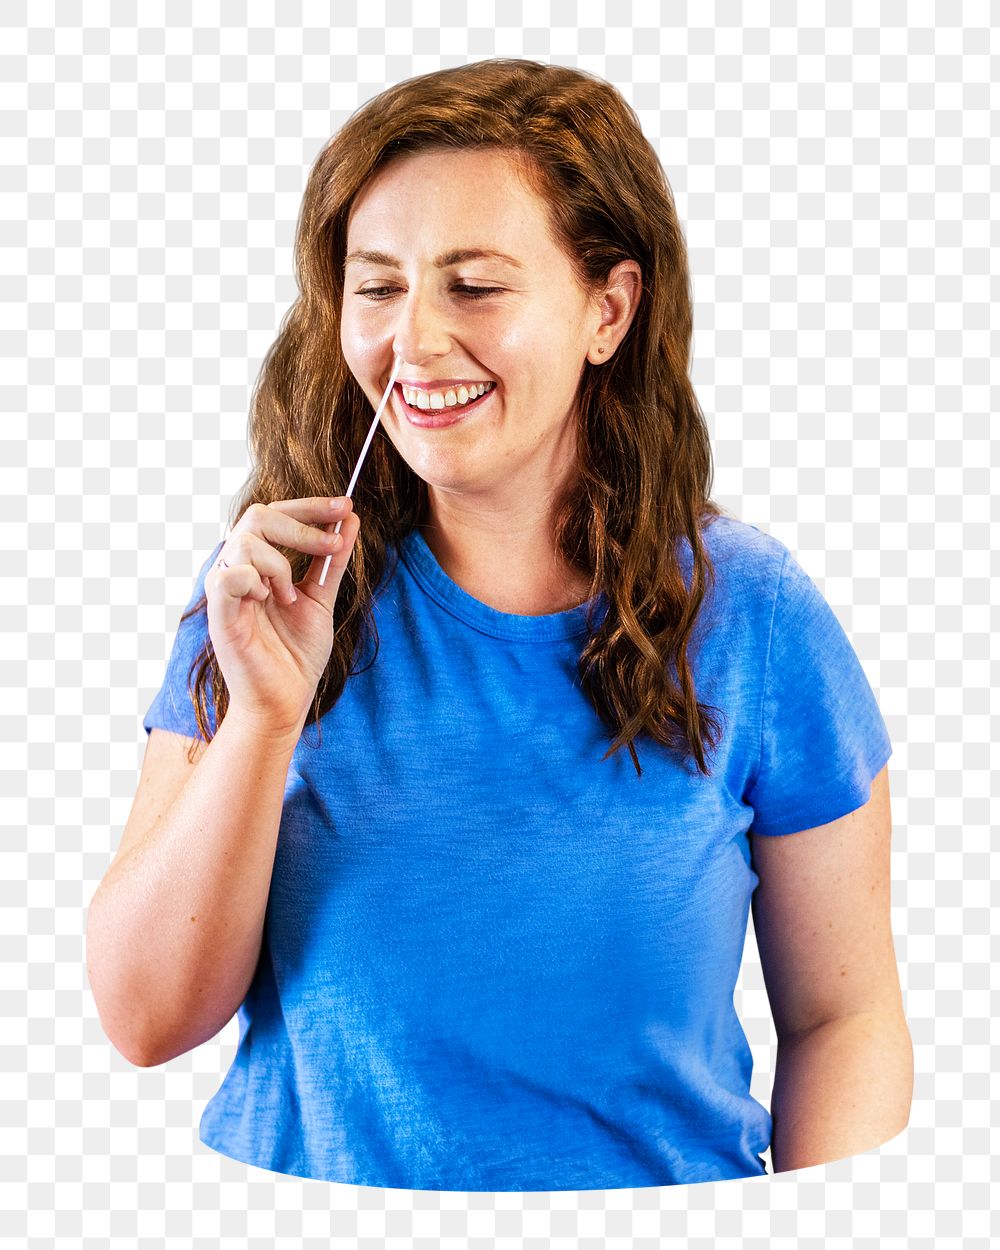 Woman Covid-19 nasal test png, transparent background